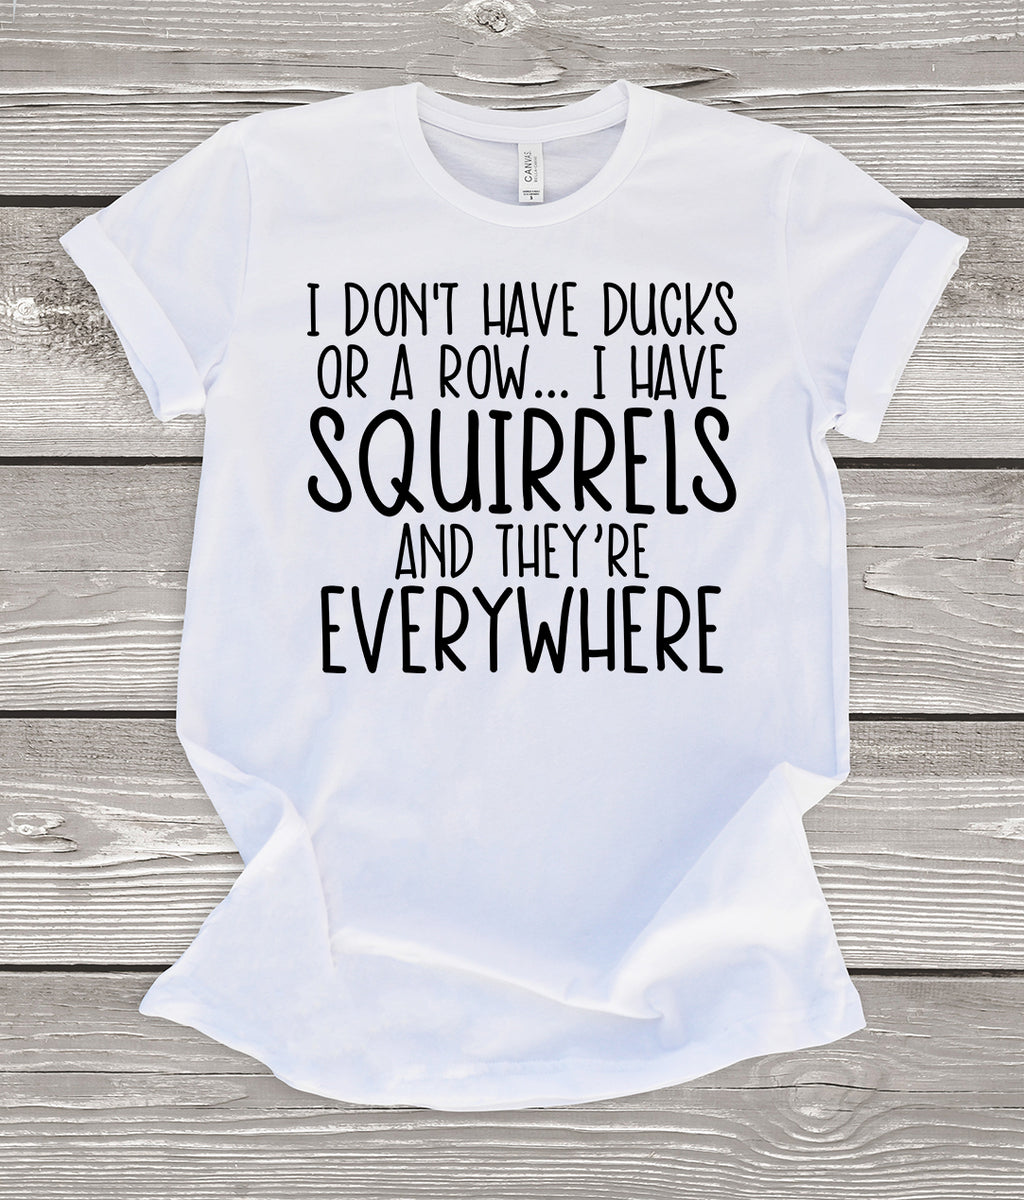 I Don't Have Ducks or a Row... I Have Squirrels and They're Everywhere White T-Shirt